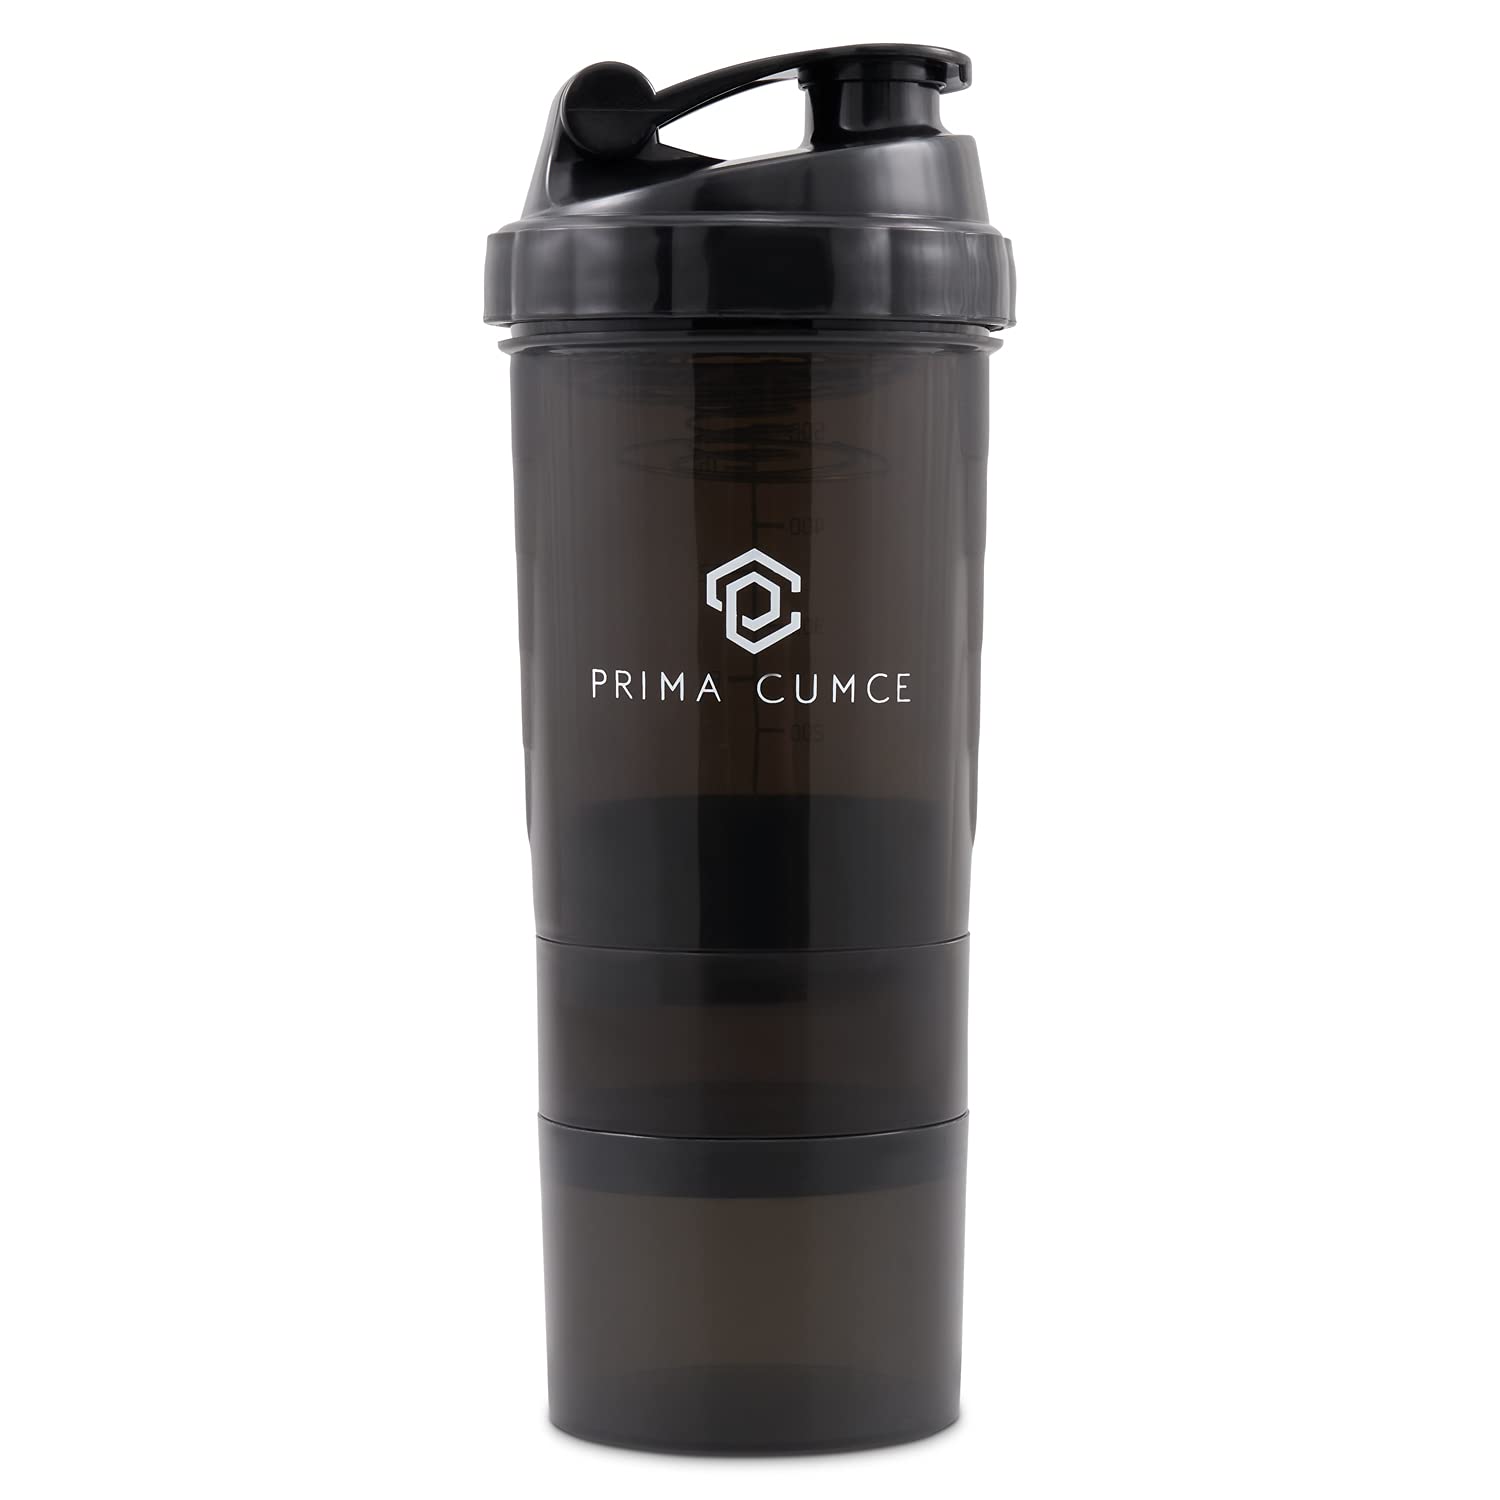 Prima Cumce BPA Free Protein Shaker Cup, 500ml Capacity - Dishwasher-Safe Sports Supplements Shakers - Durable Shake Blender Cup with Snap-Fasten Cap